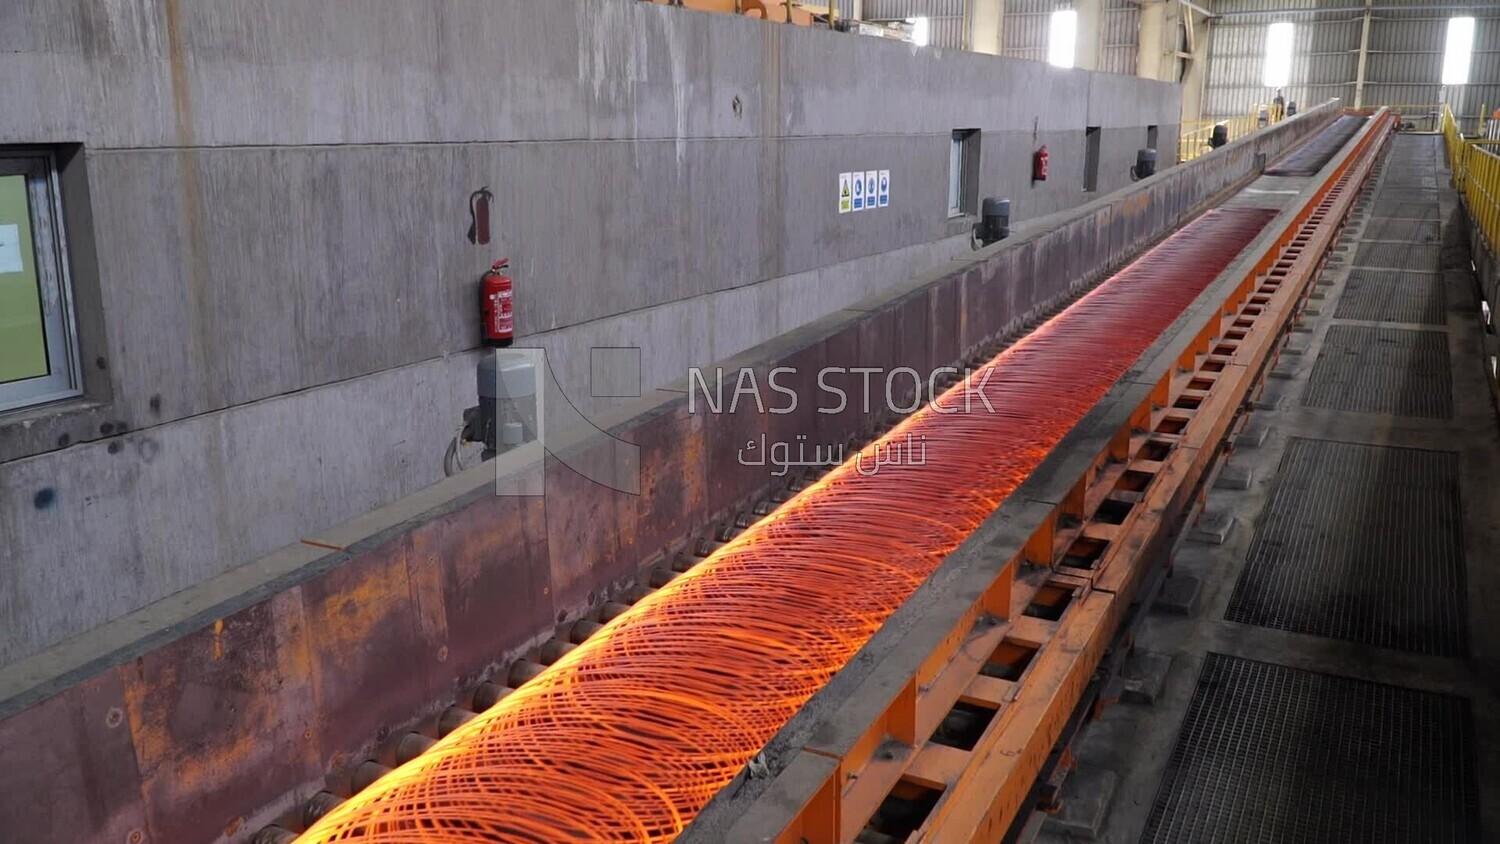 Reinforcing steel smelted in a machine